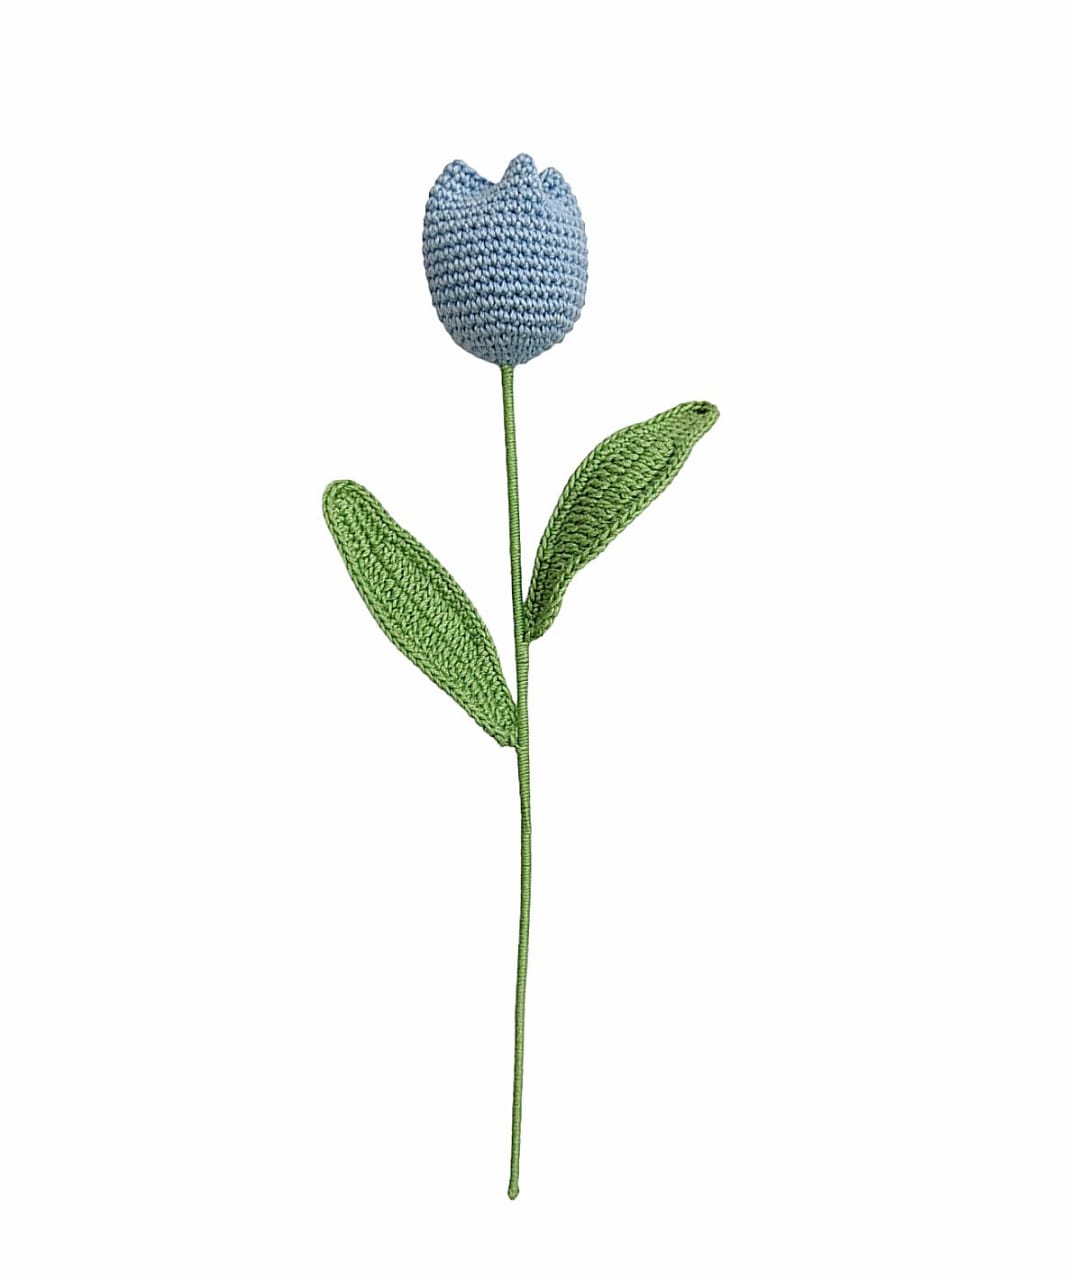 Handcrafted Crochet Tulips :Quaint Charm for Modern Interiors